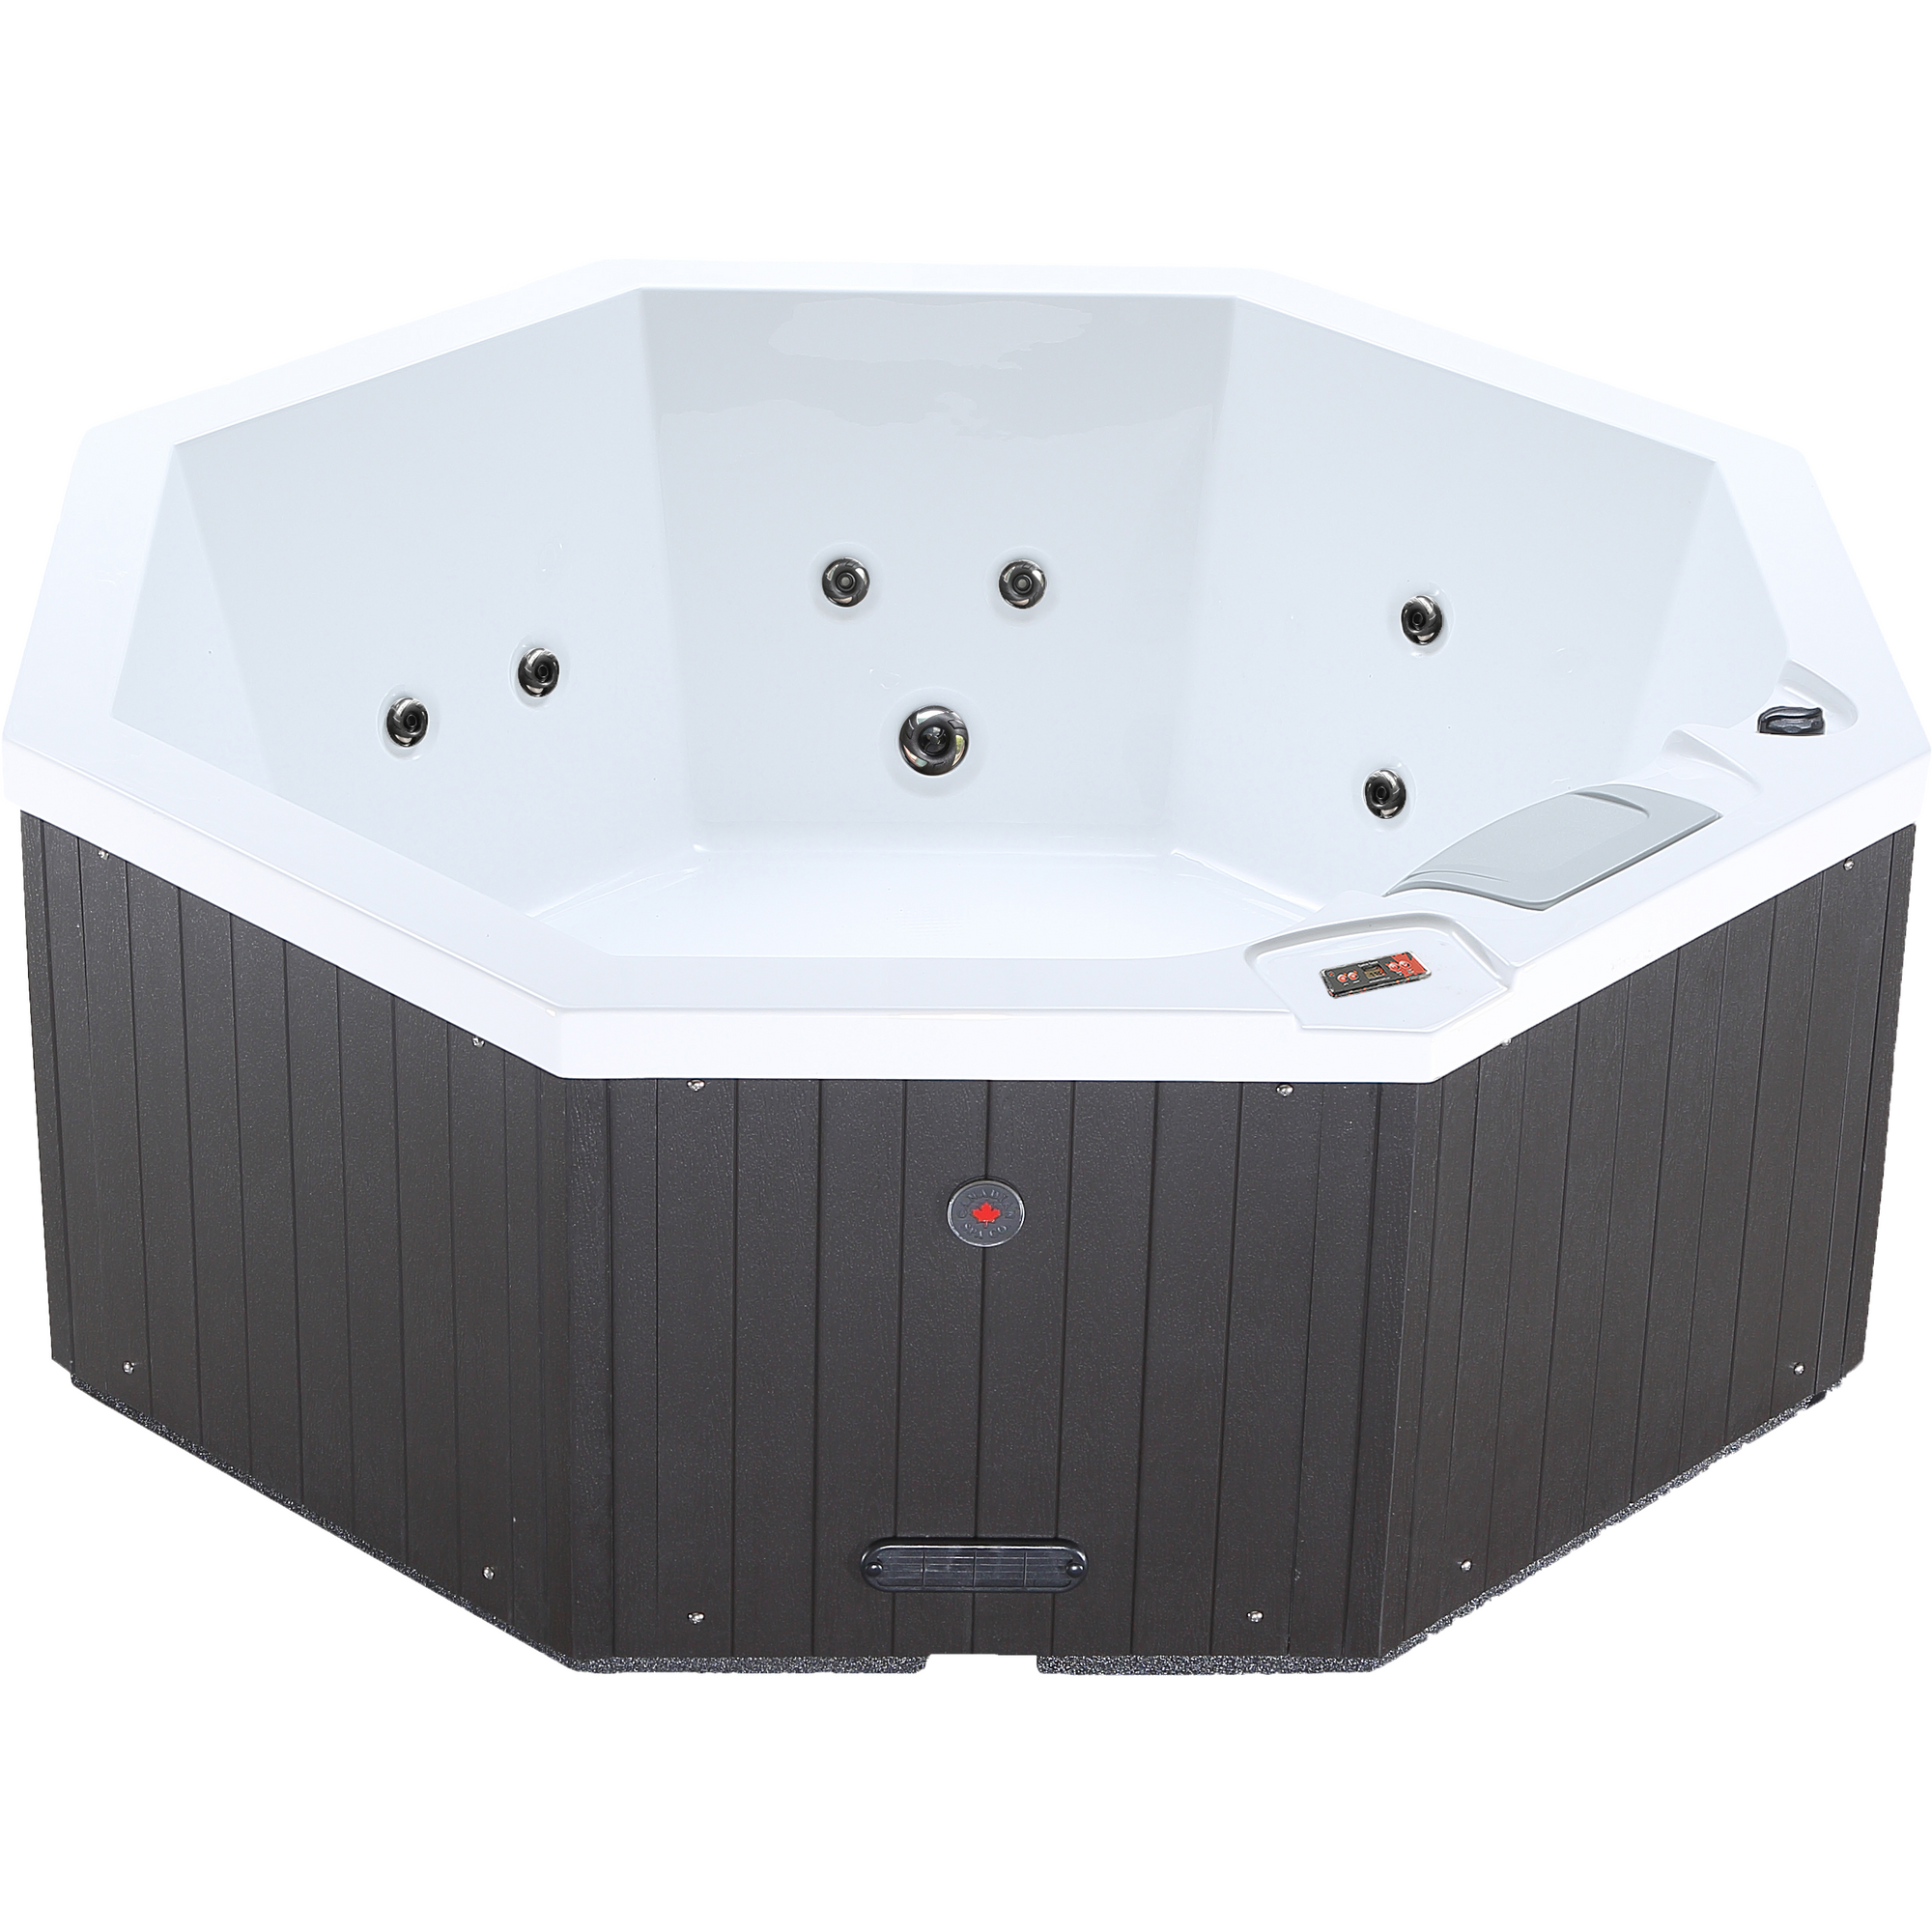 Canadian Spa Muskoka 5-Person 14-Jet Portable Plug & Play Hot Tub - White inside - Black outside - with adjustable stainless steel hydrotherapy jets, multi-coloured LED lighting - Size: 74" x 74"x 29" - Front view - KH-10096 - Vital Hydrotherapy